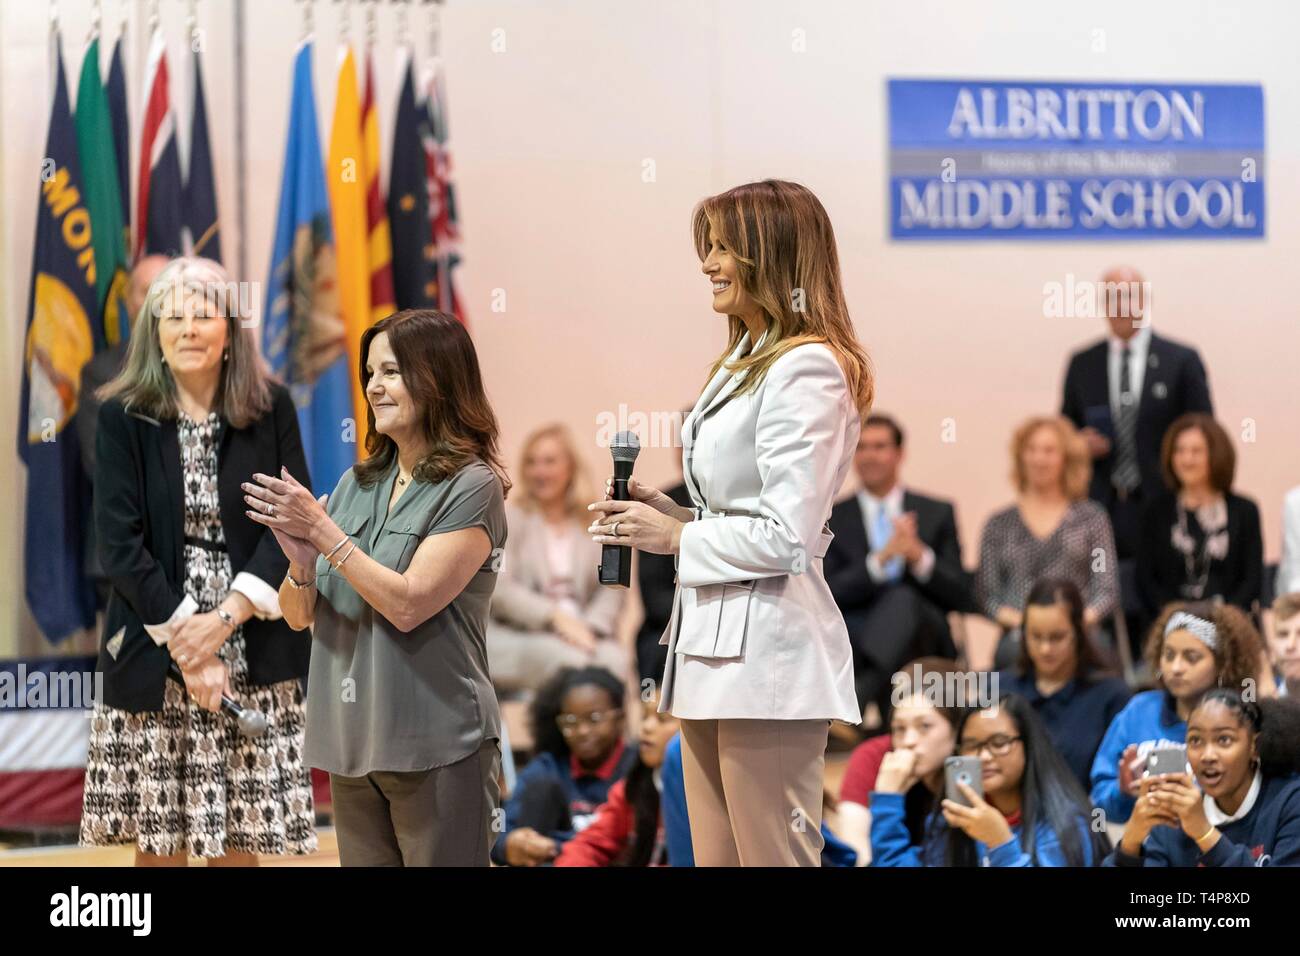 U.S First Lady Melania Trump, joined by Karen Pence, center, wife of Vice President Mike Pence, and school principal Dr. Laura Hussein, left, delivers remarks during an assembly at Albritton Middle School April 15, 2019 in Fort Bragg, North Carolina. The First Lady visited the school for military families then addressed soldiers at the base. Stock Photo